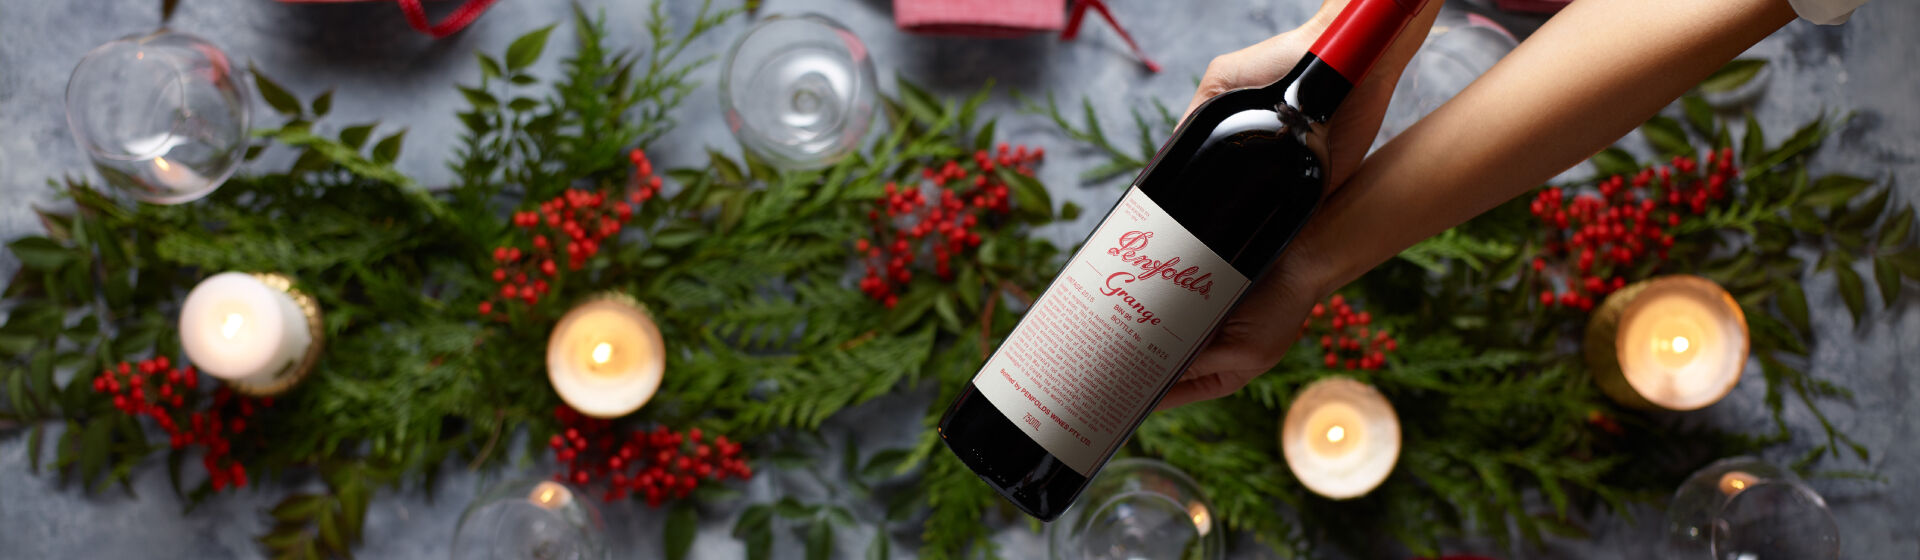 Penfolds Grange being gifted over festive table scape